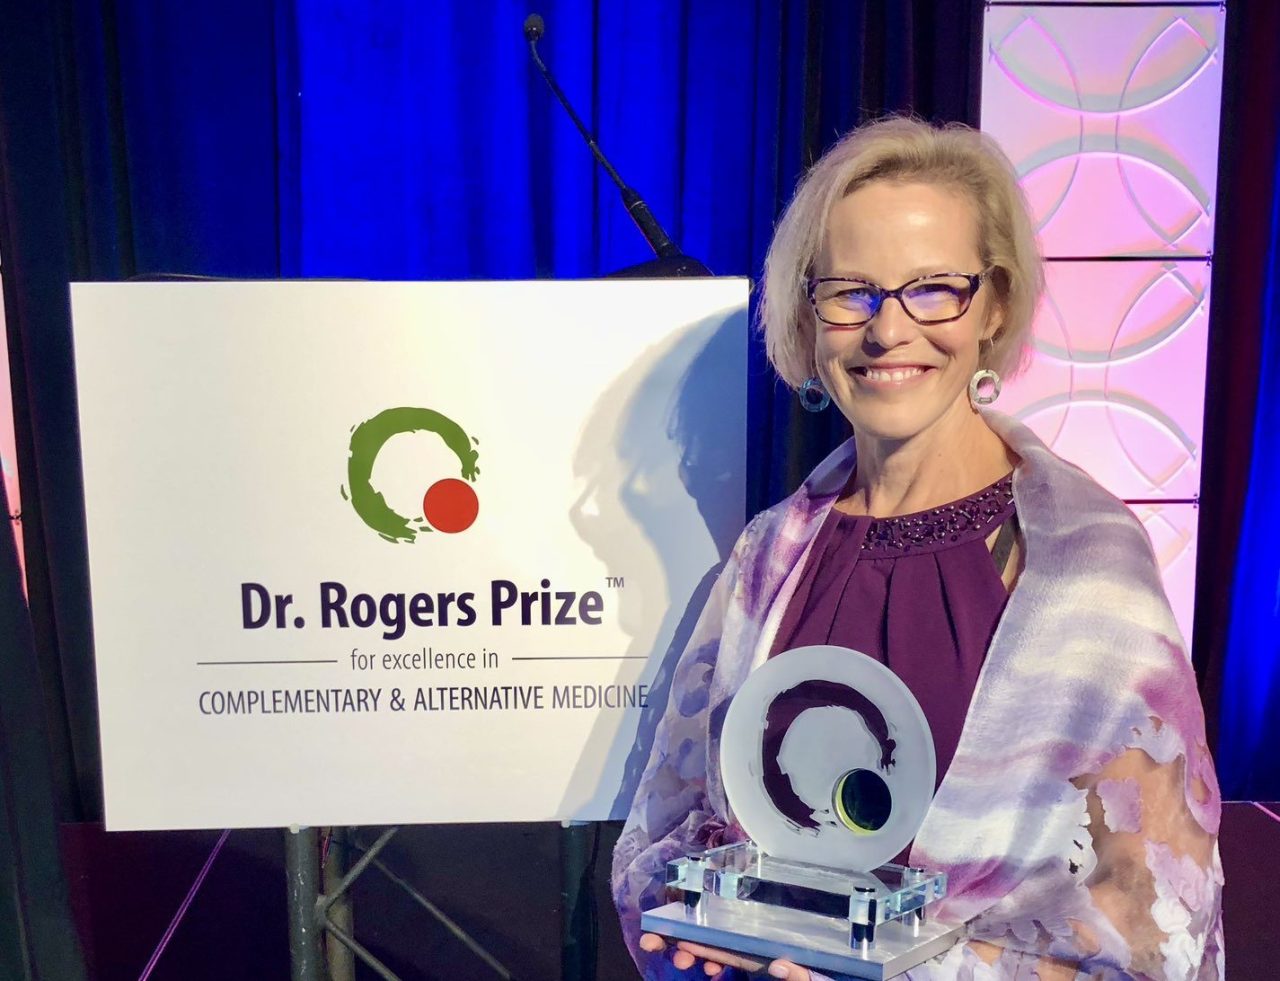 Linda E. Carlson: So honored to receive the 2023 Dr. Rogers Prize in complementary medicine.